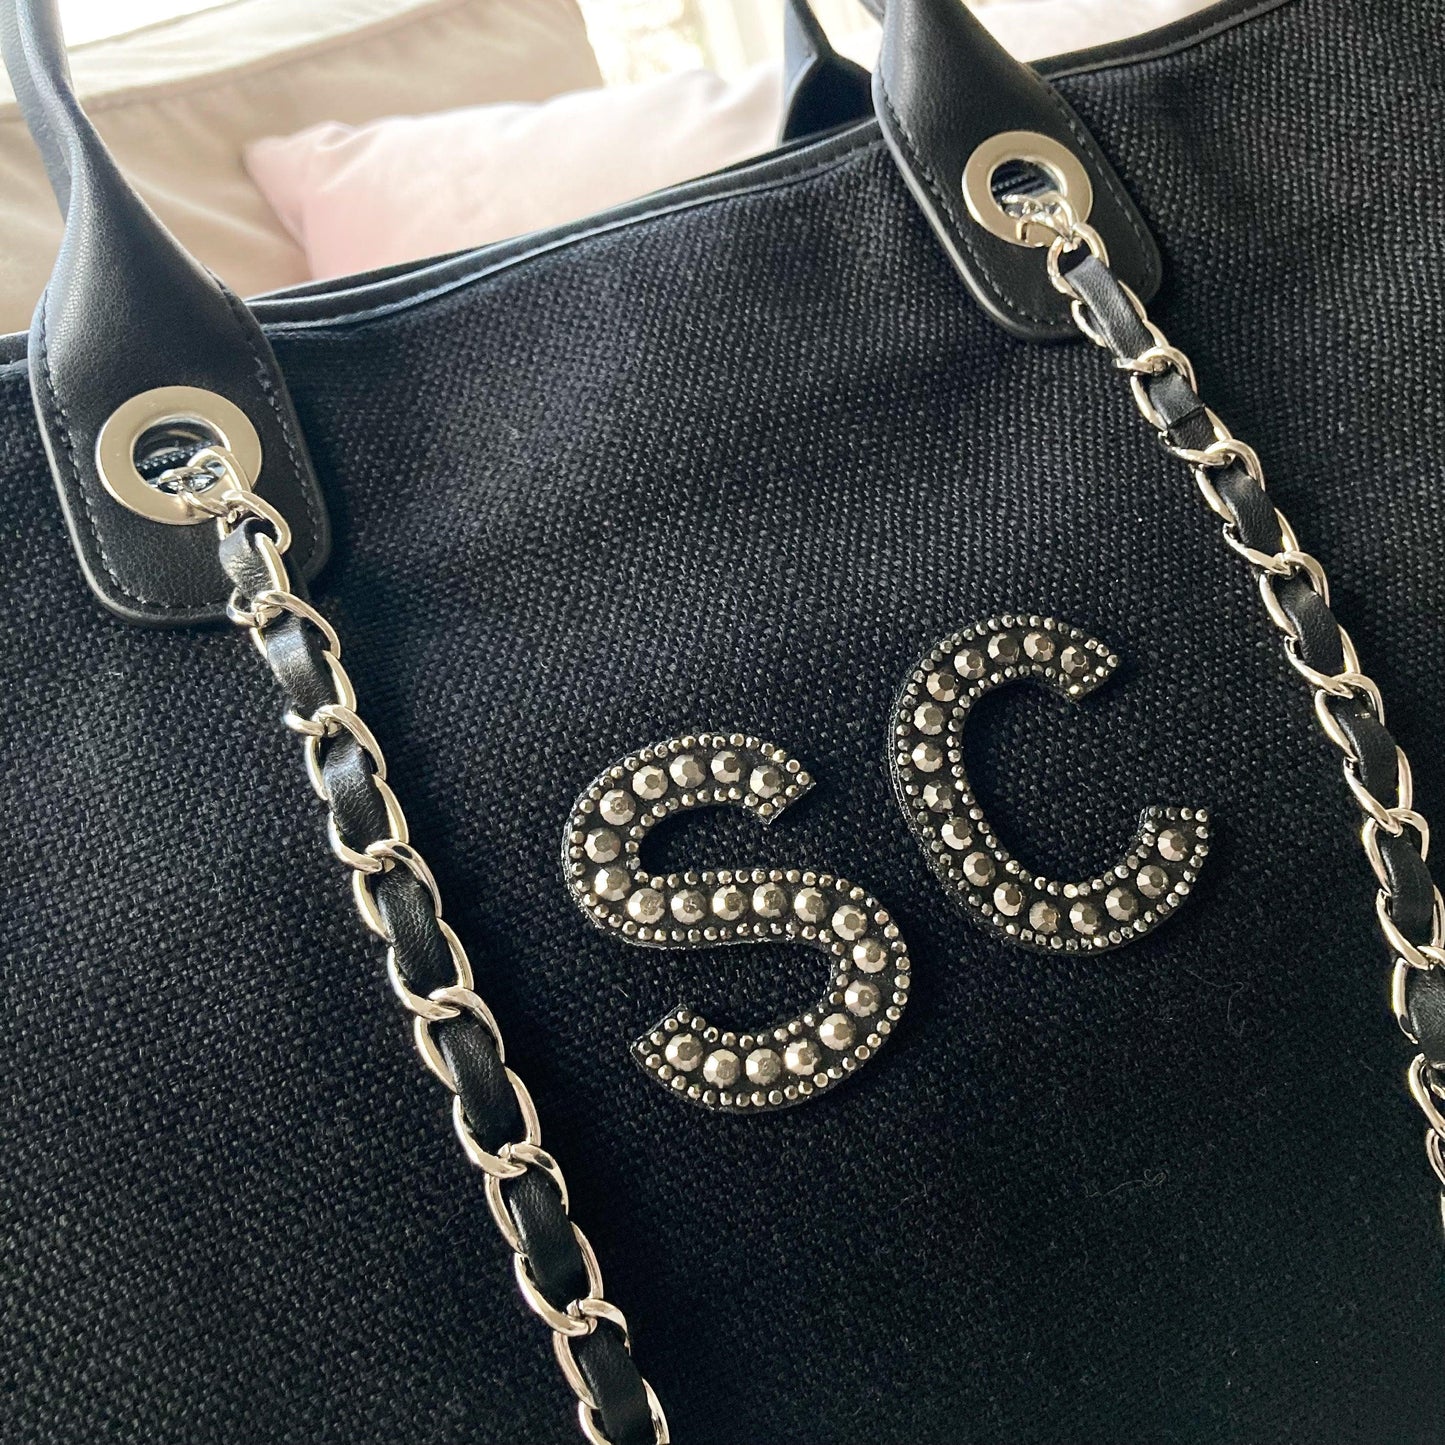 embellished lettering with carry chain on the large black canvas tote